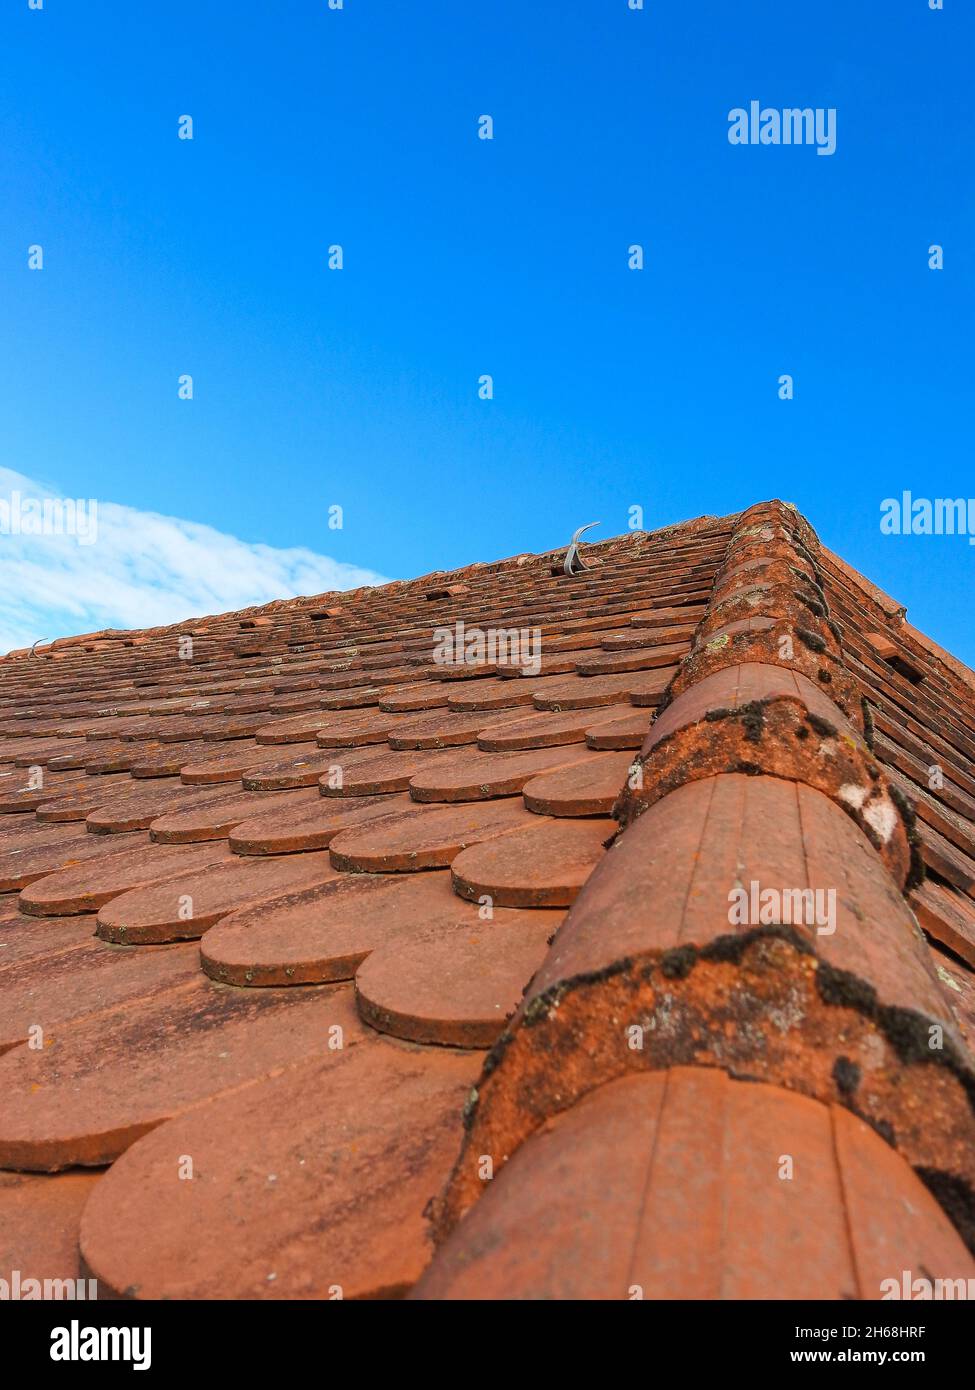 A vertical shot of old rusty roof tiles against blue sky Stock Photo